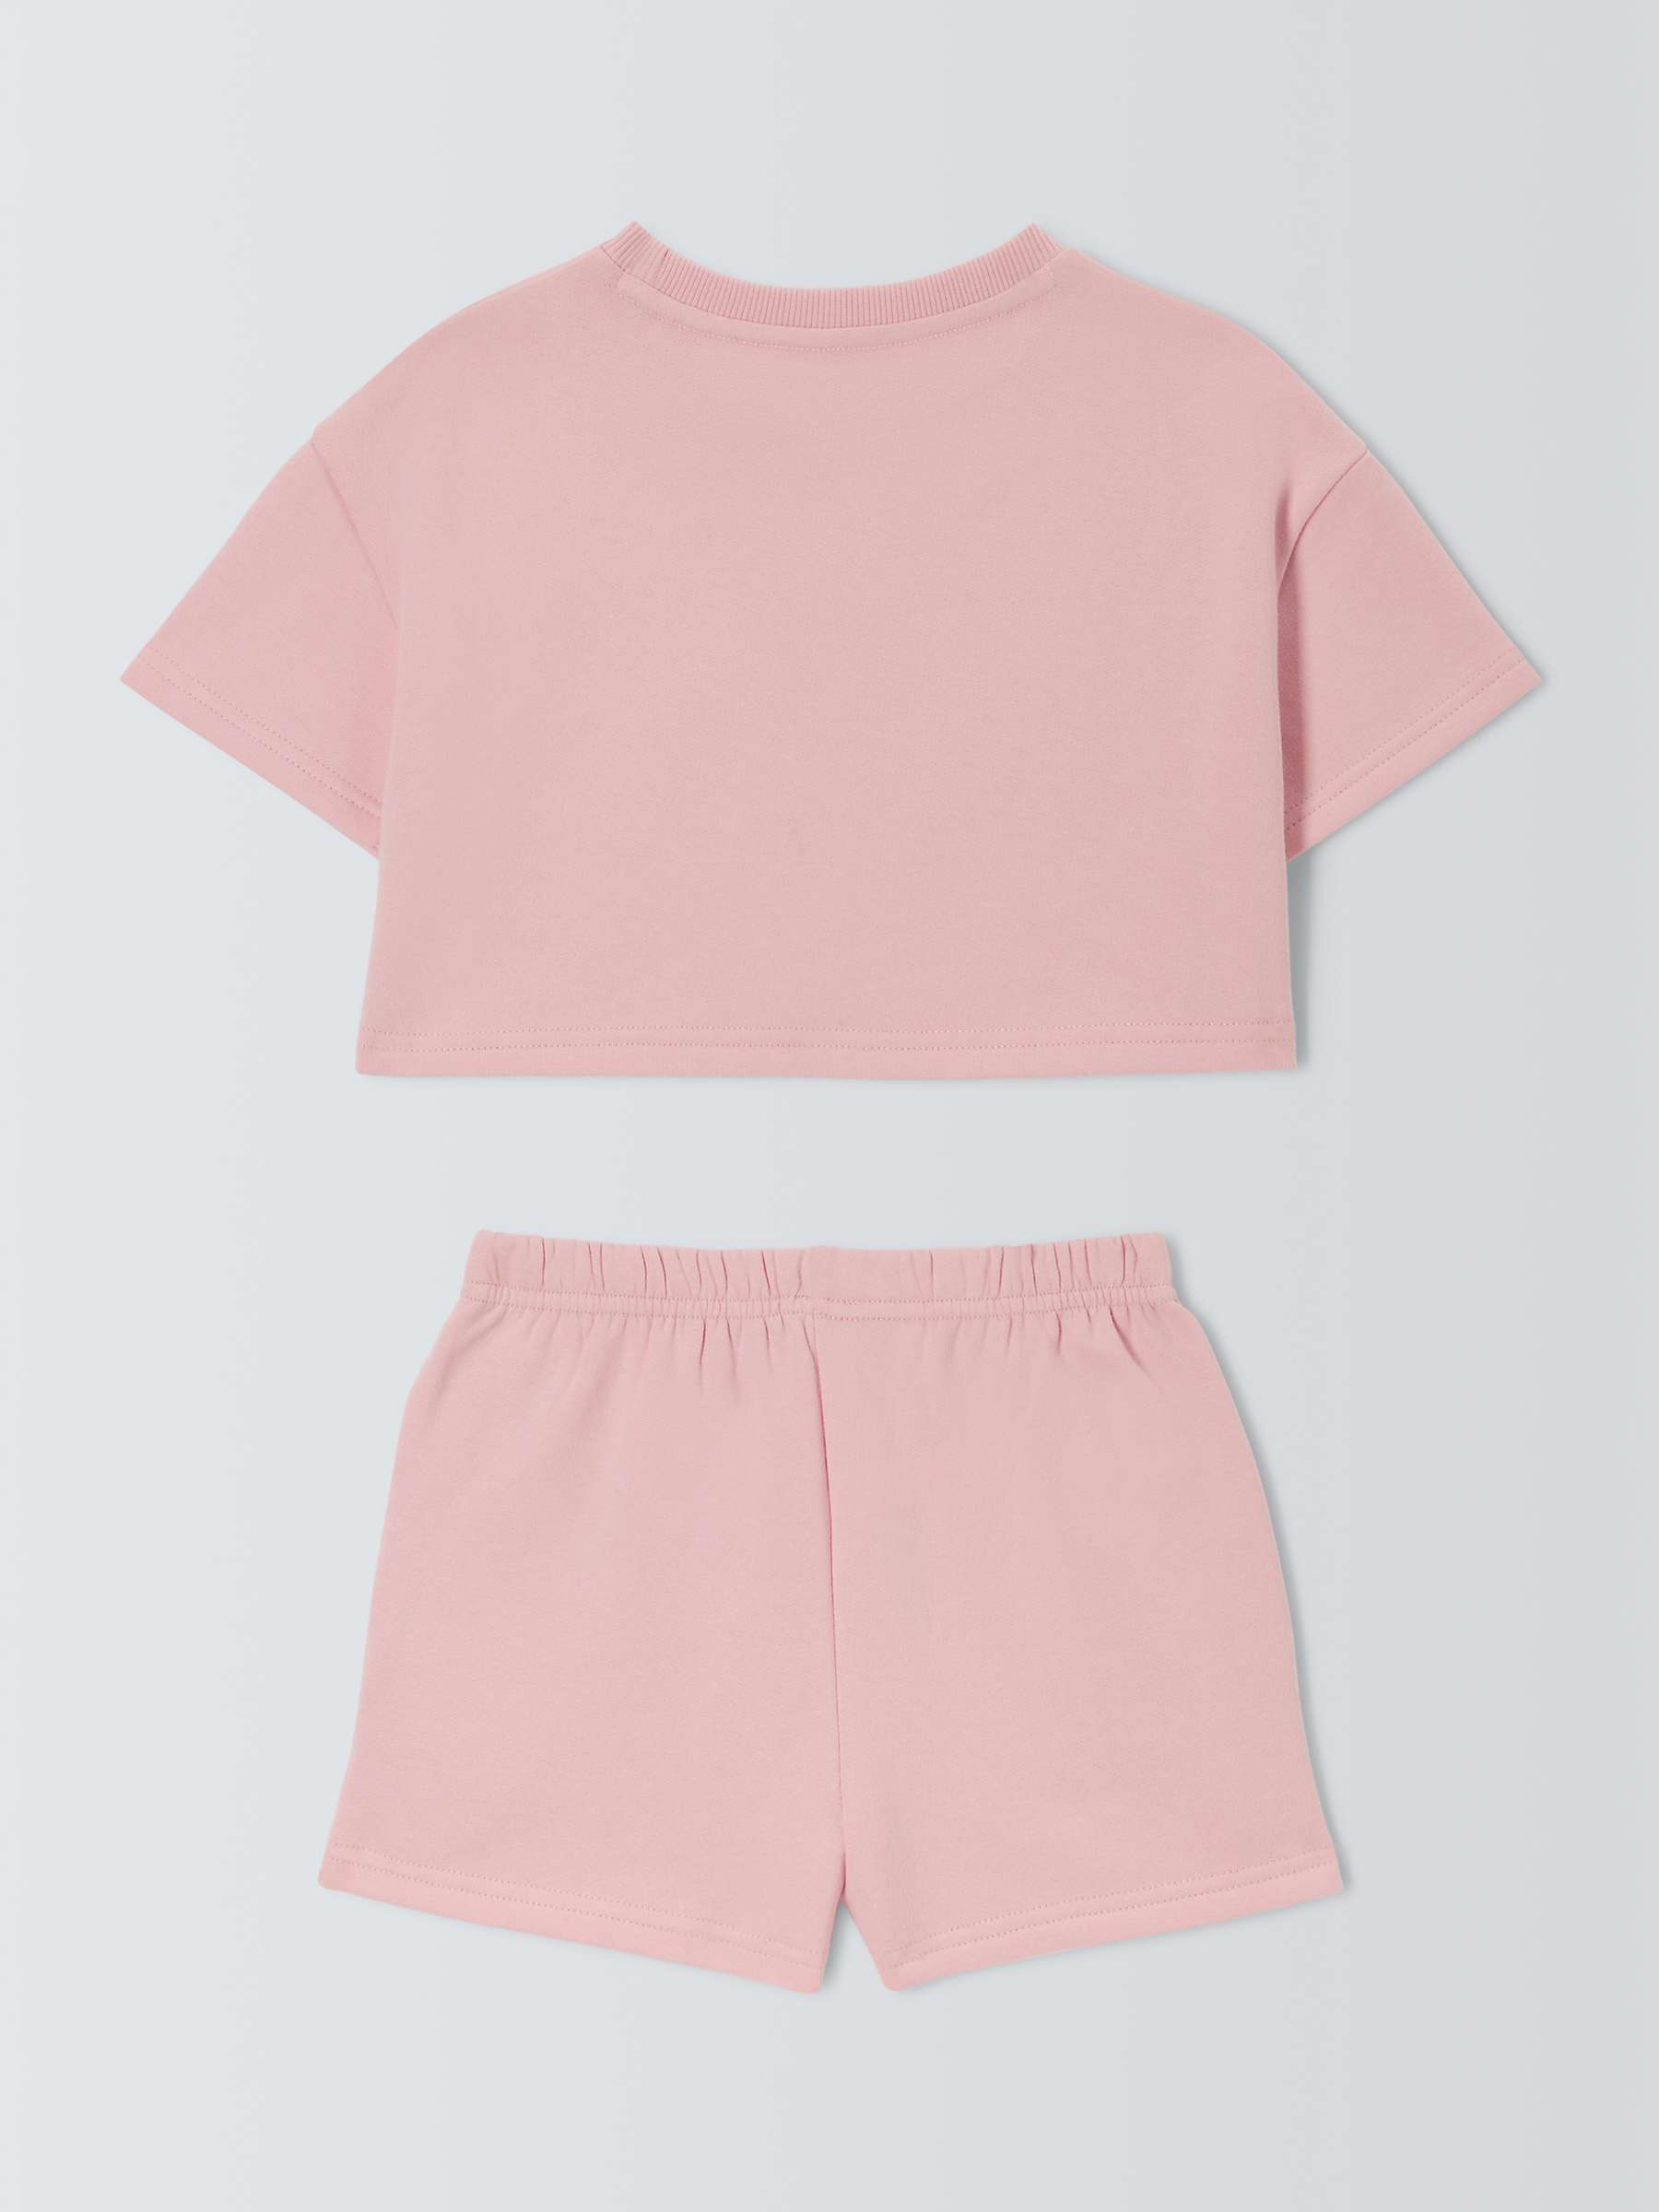 Buy Brand Threads Kids' Disney Lilo and Stitch Boxy Top & Shorts Set, Pink Online at johnlewis.com